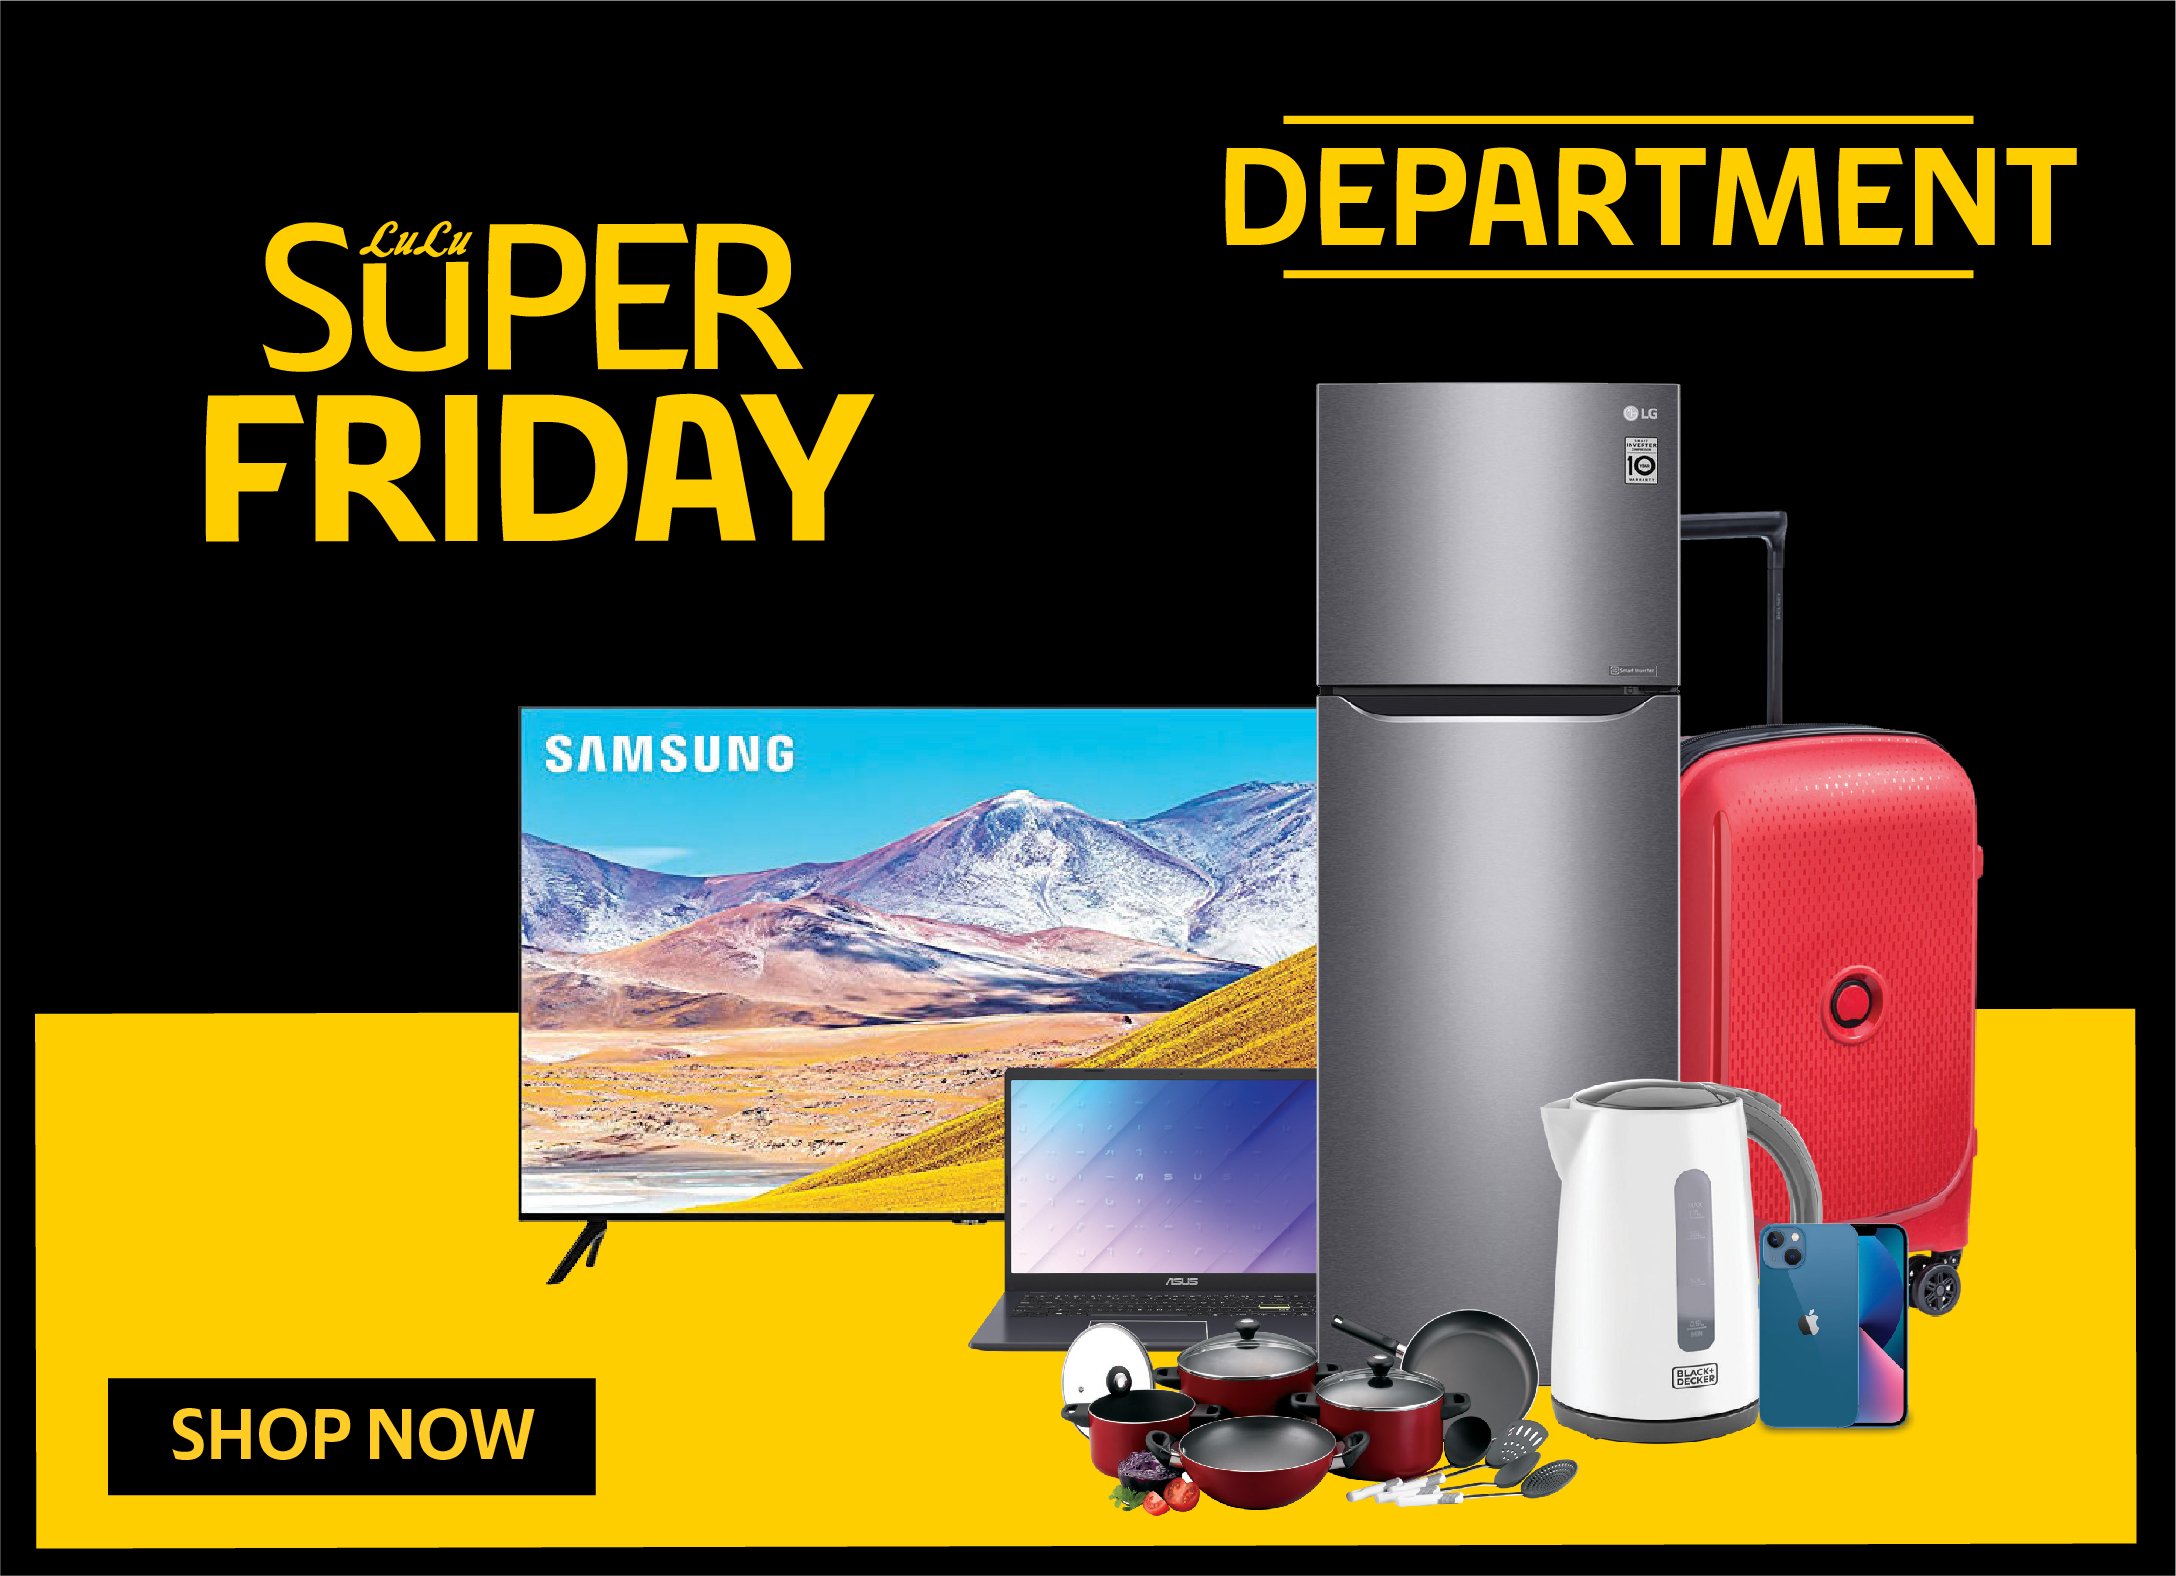 LuLu launches 'Super Friday' promotion with tech and grocery offers - Gulf  Times